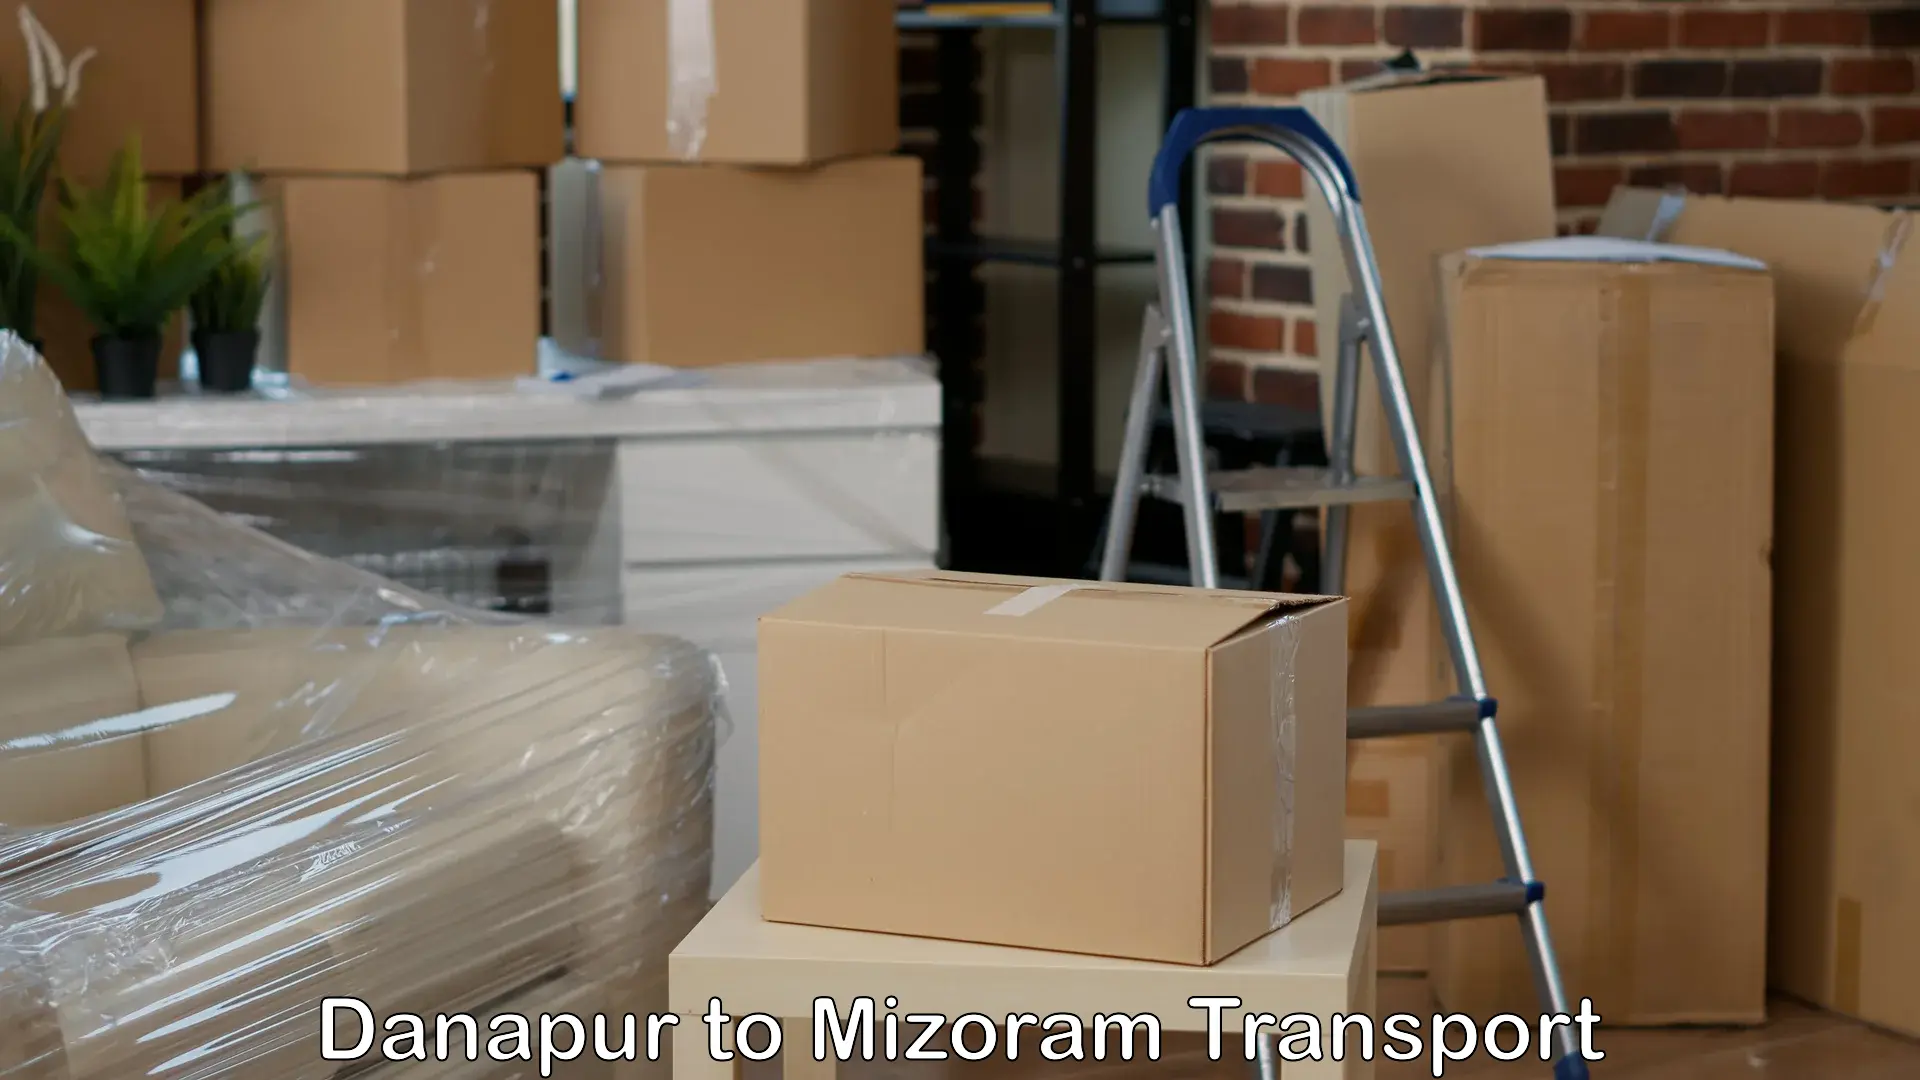 Transport bike from one state to another Danapur to Mizoram